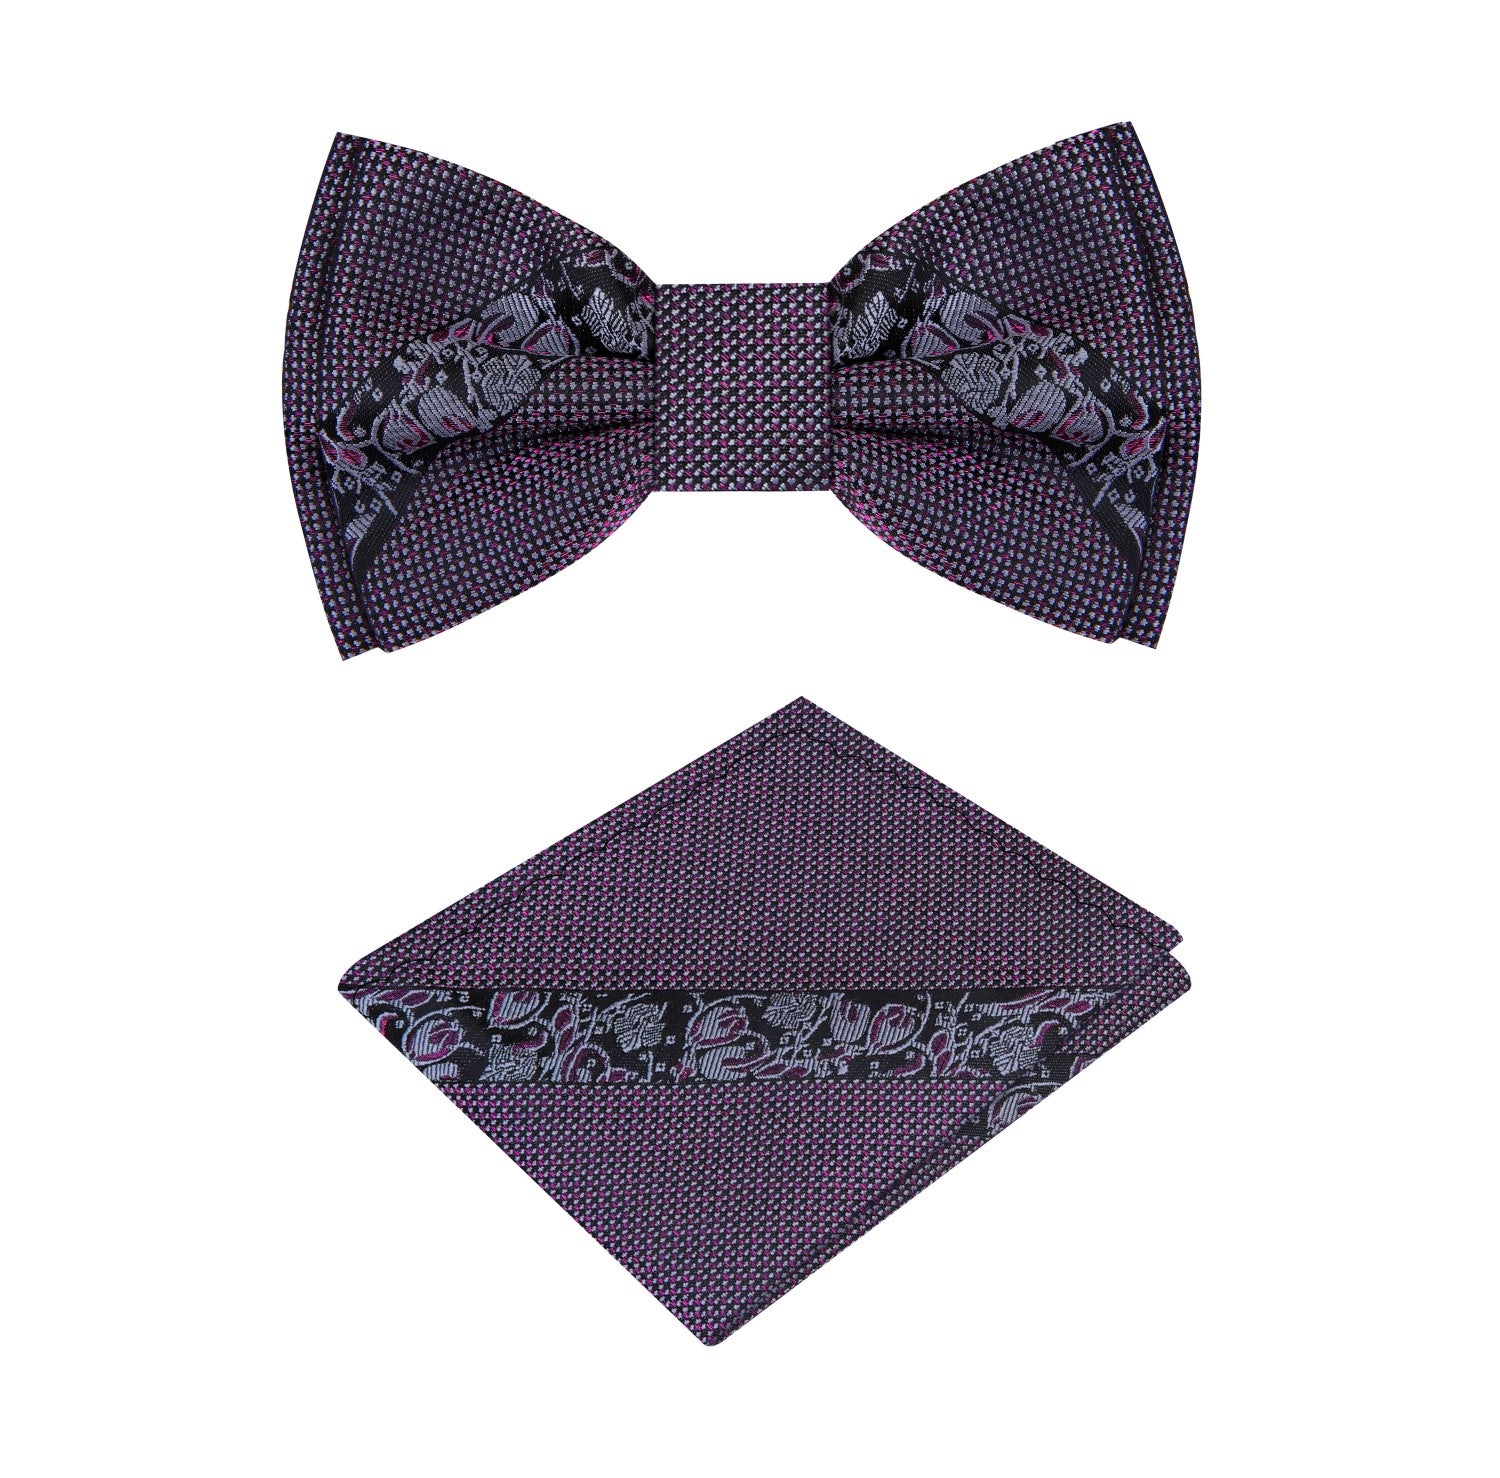 A Metallic Purple, Black Color With Intricate Floral Pattern Silk Kids Pre-Tied Bow Tie, Matching Pocket Square